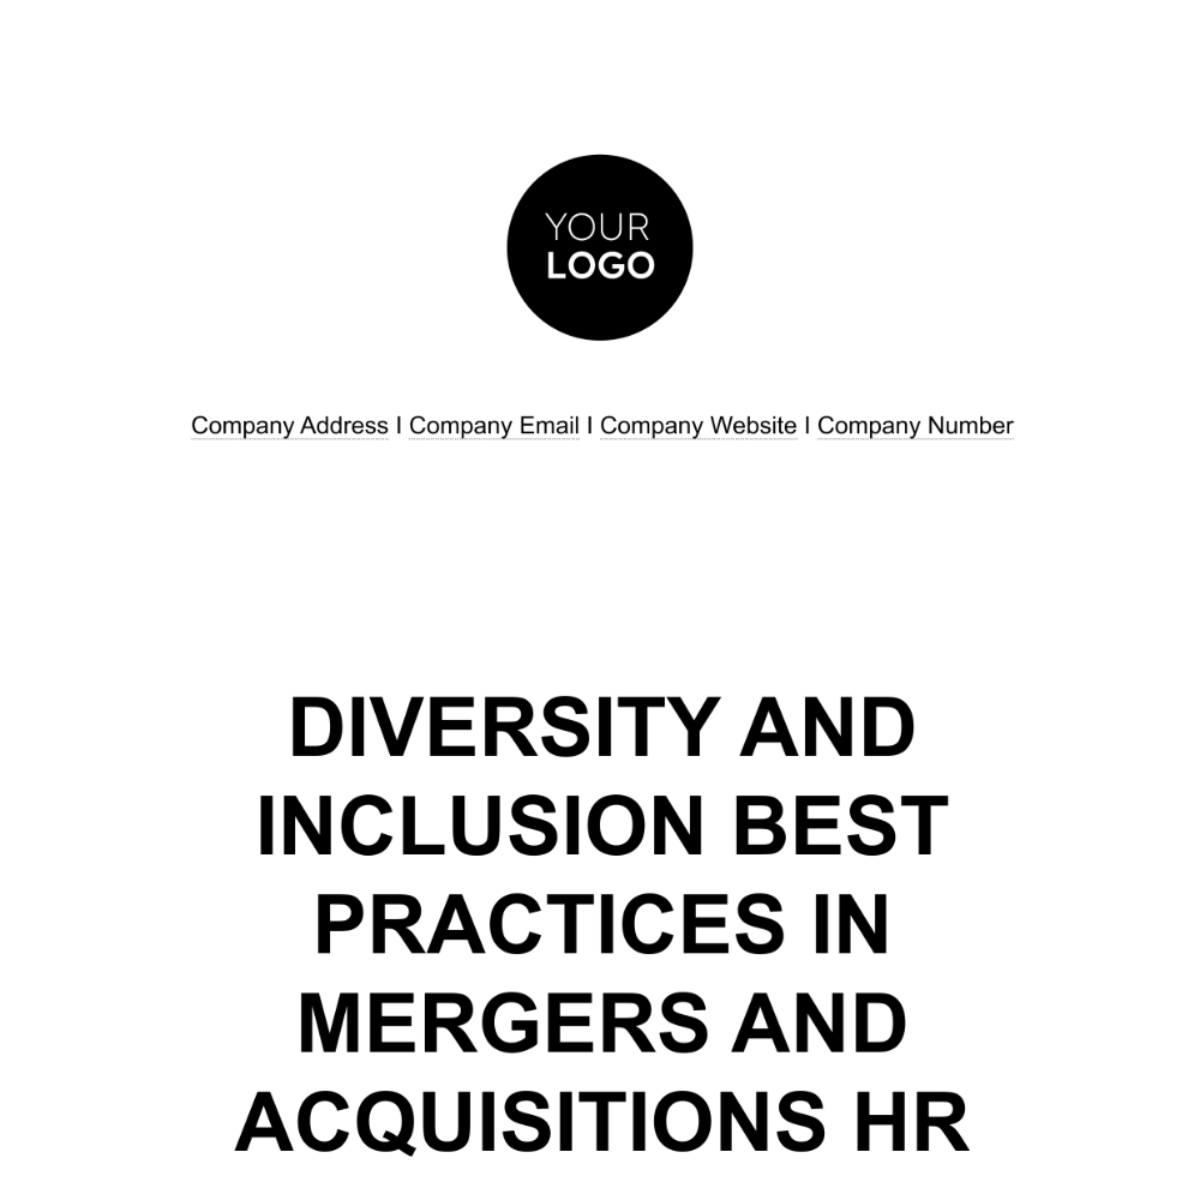 Free Diversity and Inclusion Best Practices in Mergers and Acquisitions HR Template